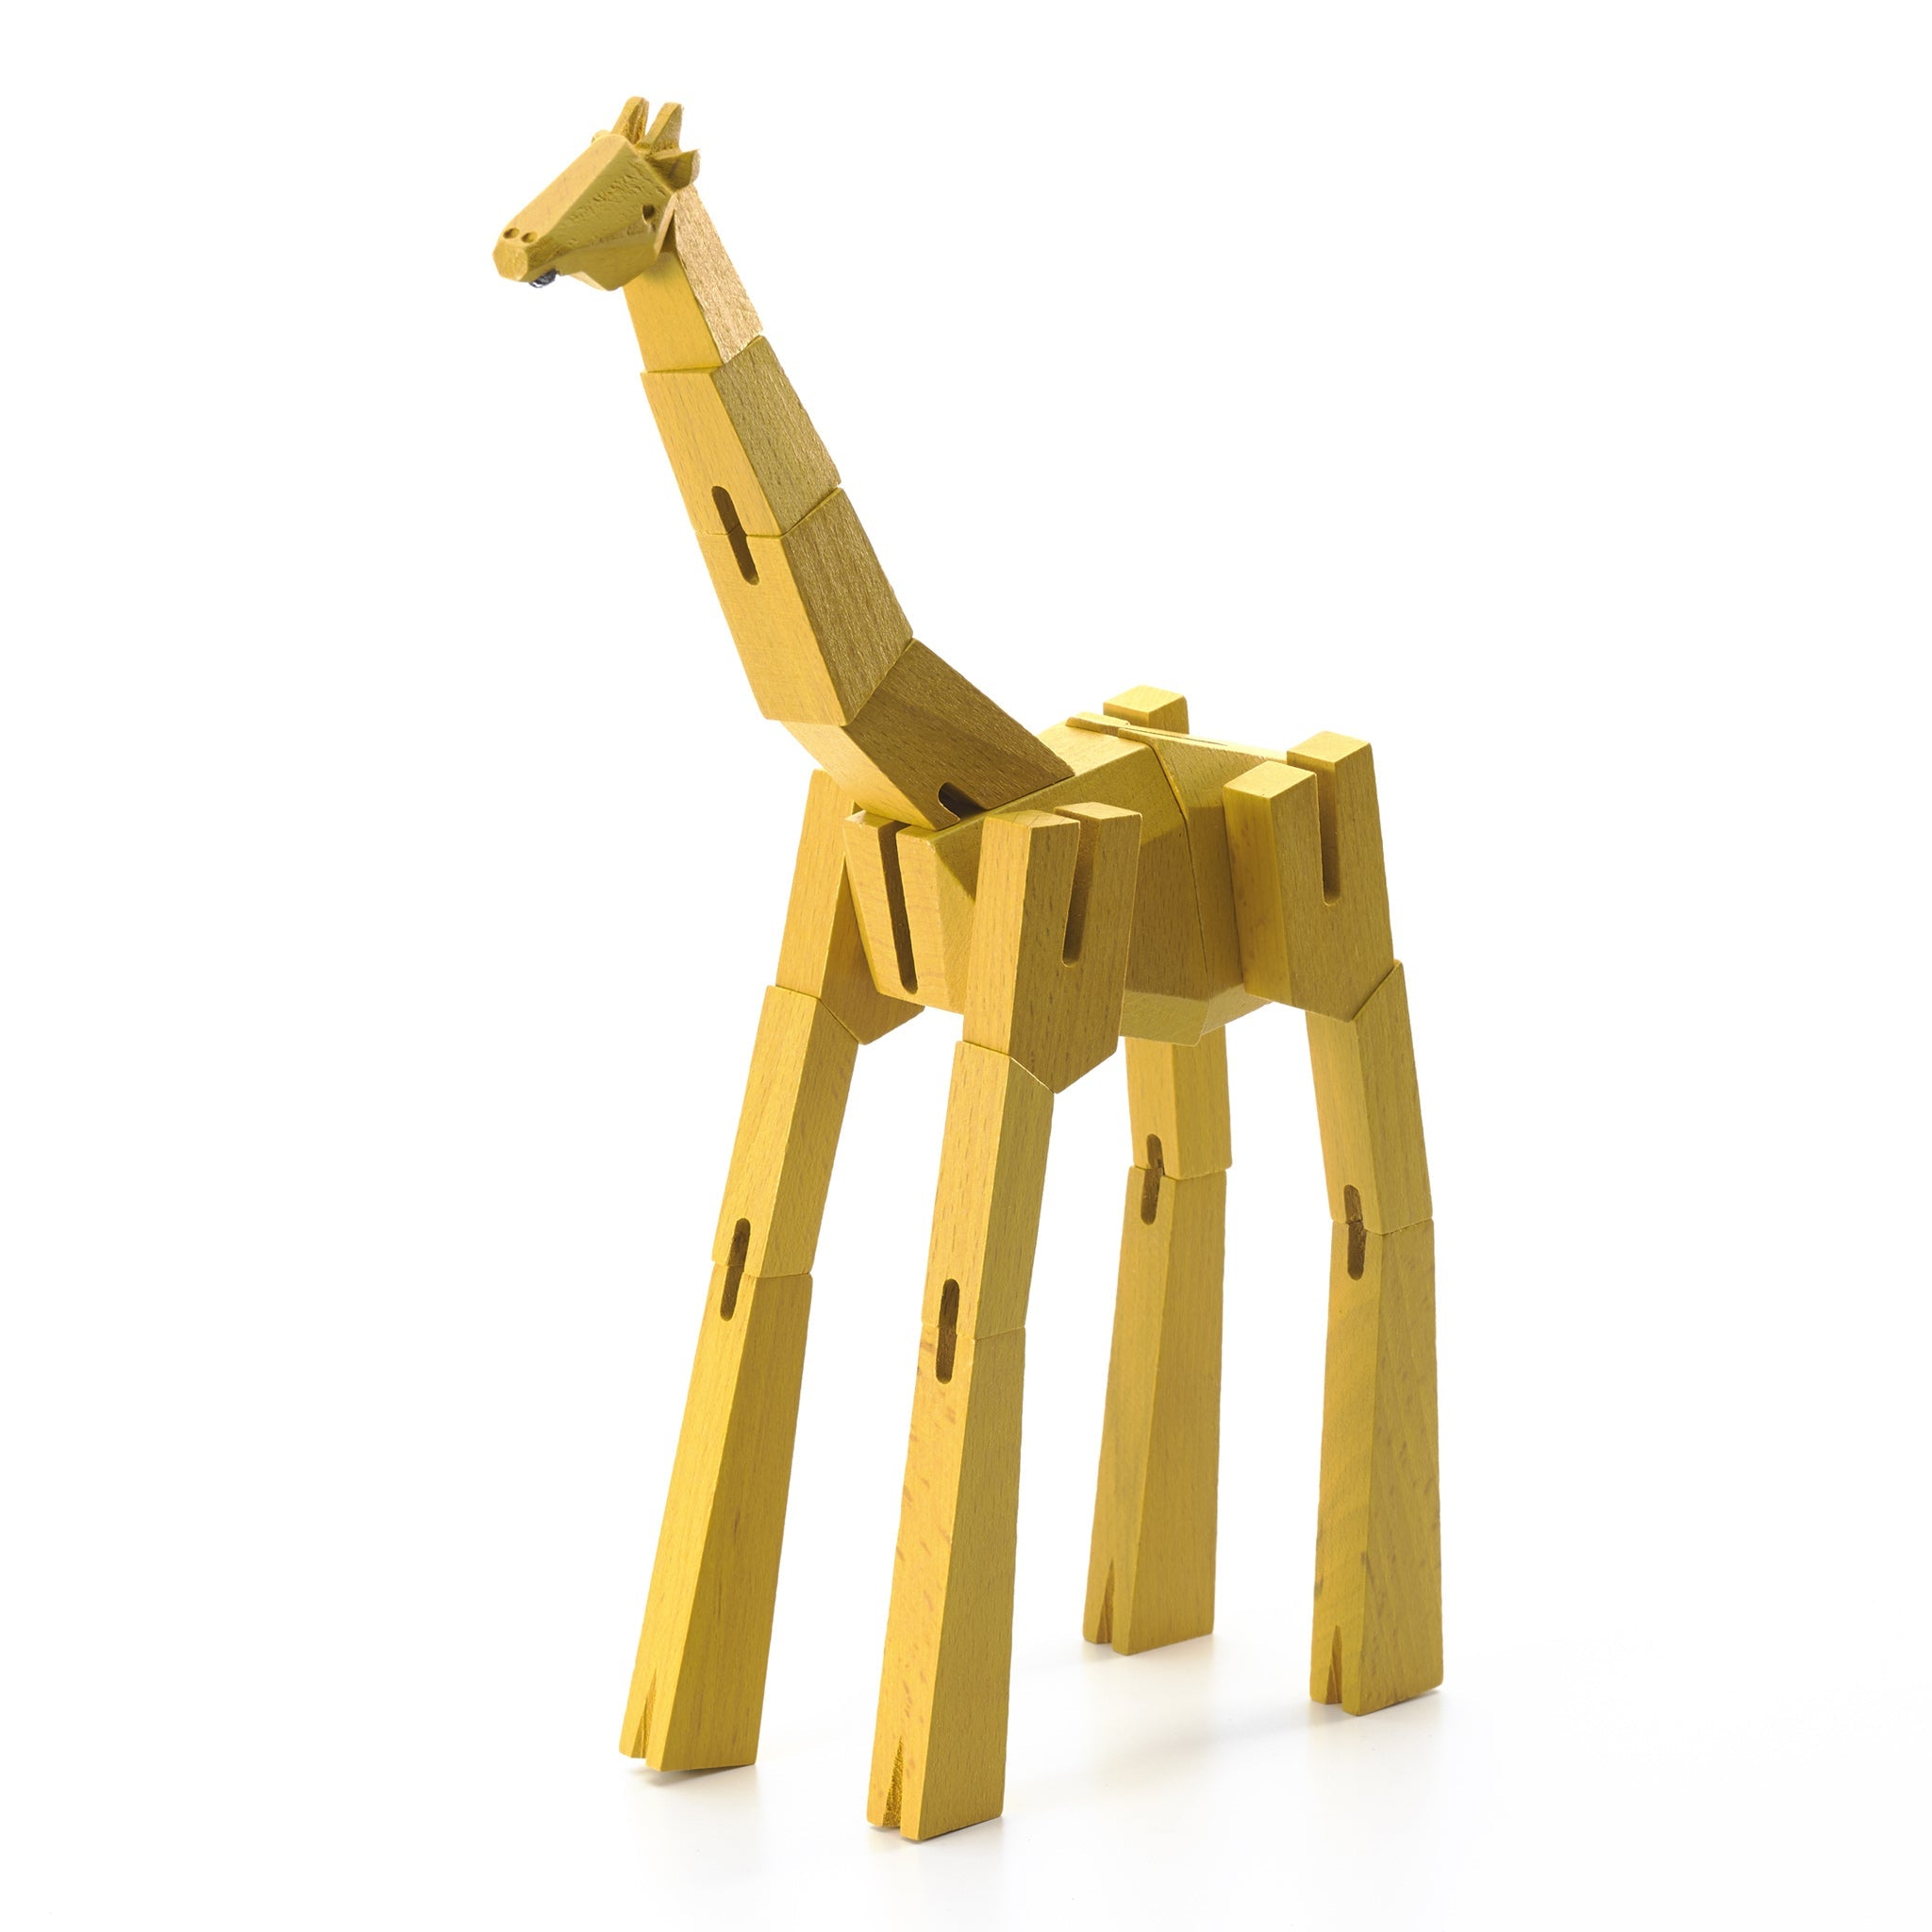 Morphits ® Giraffe Wooden Toy Playset Puzzle Yellow